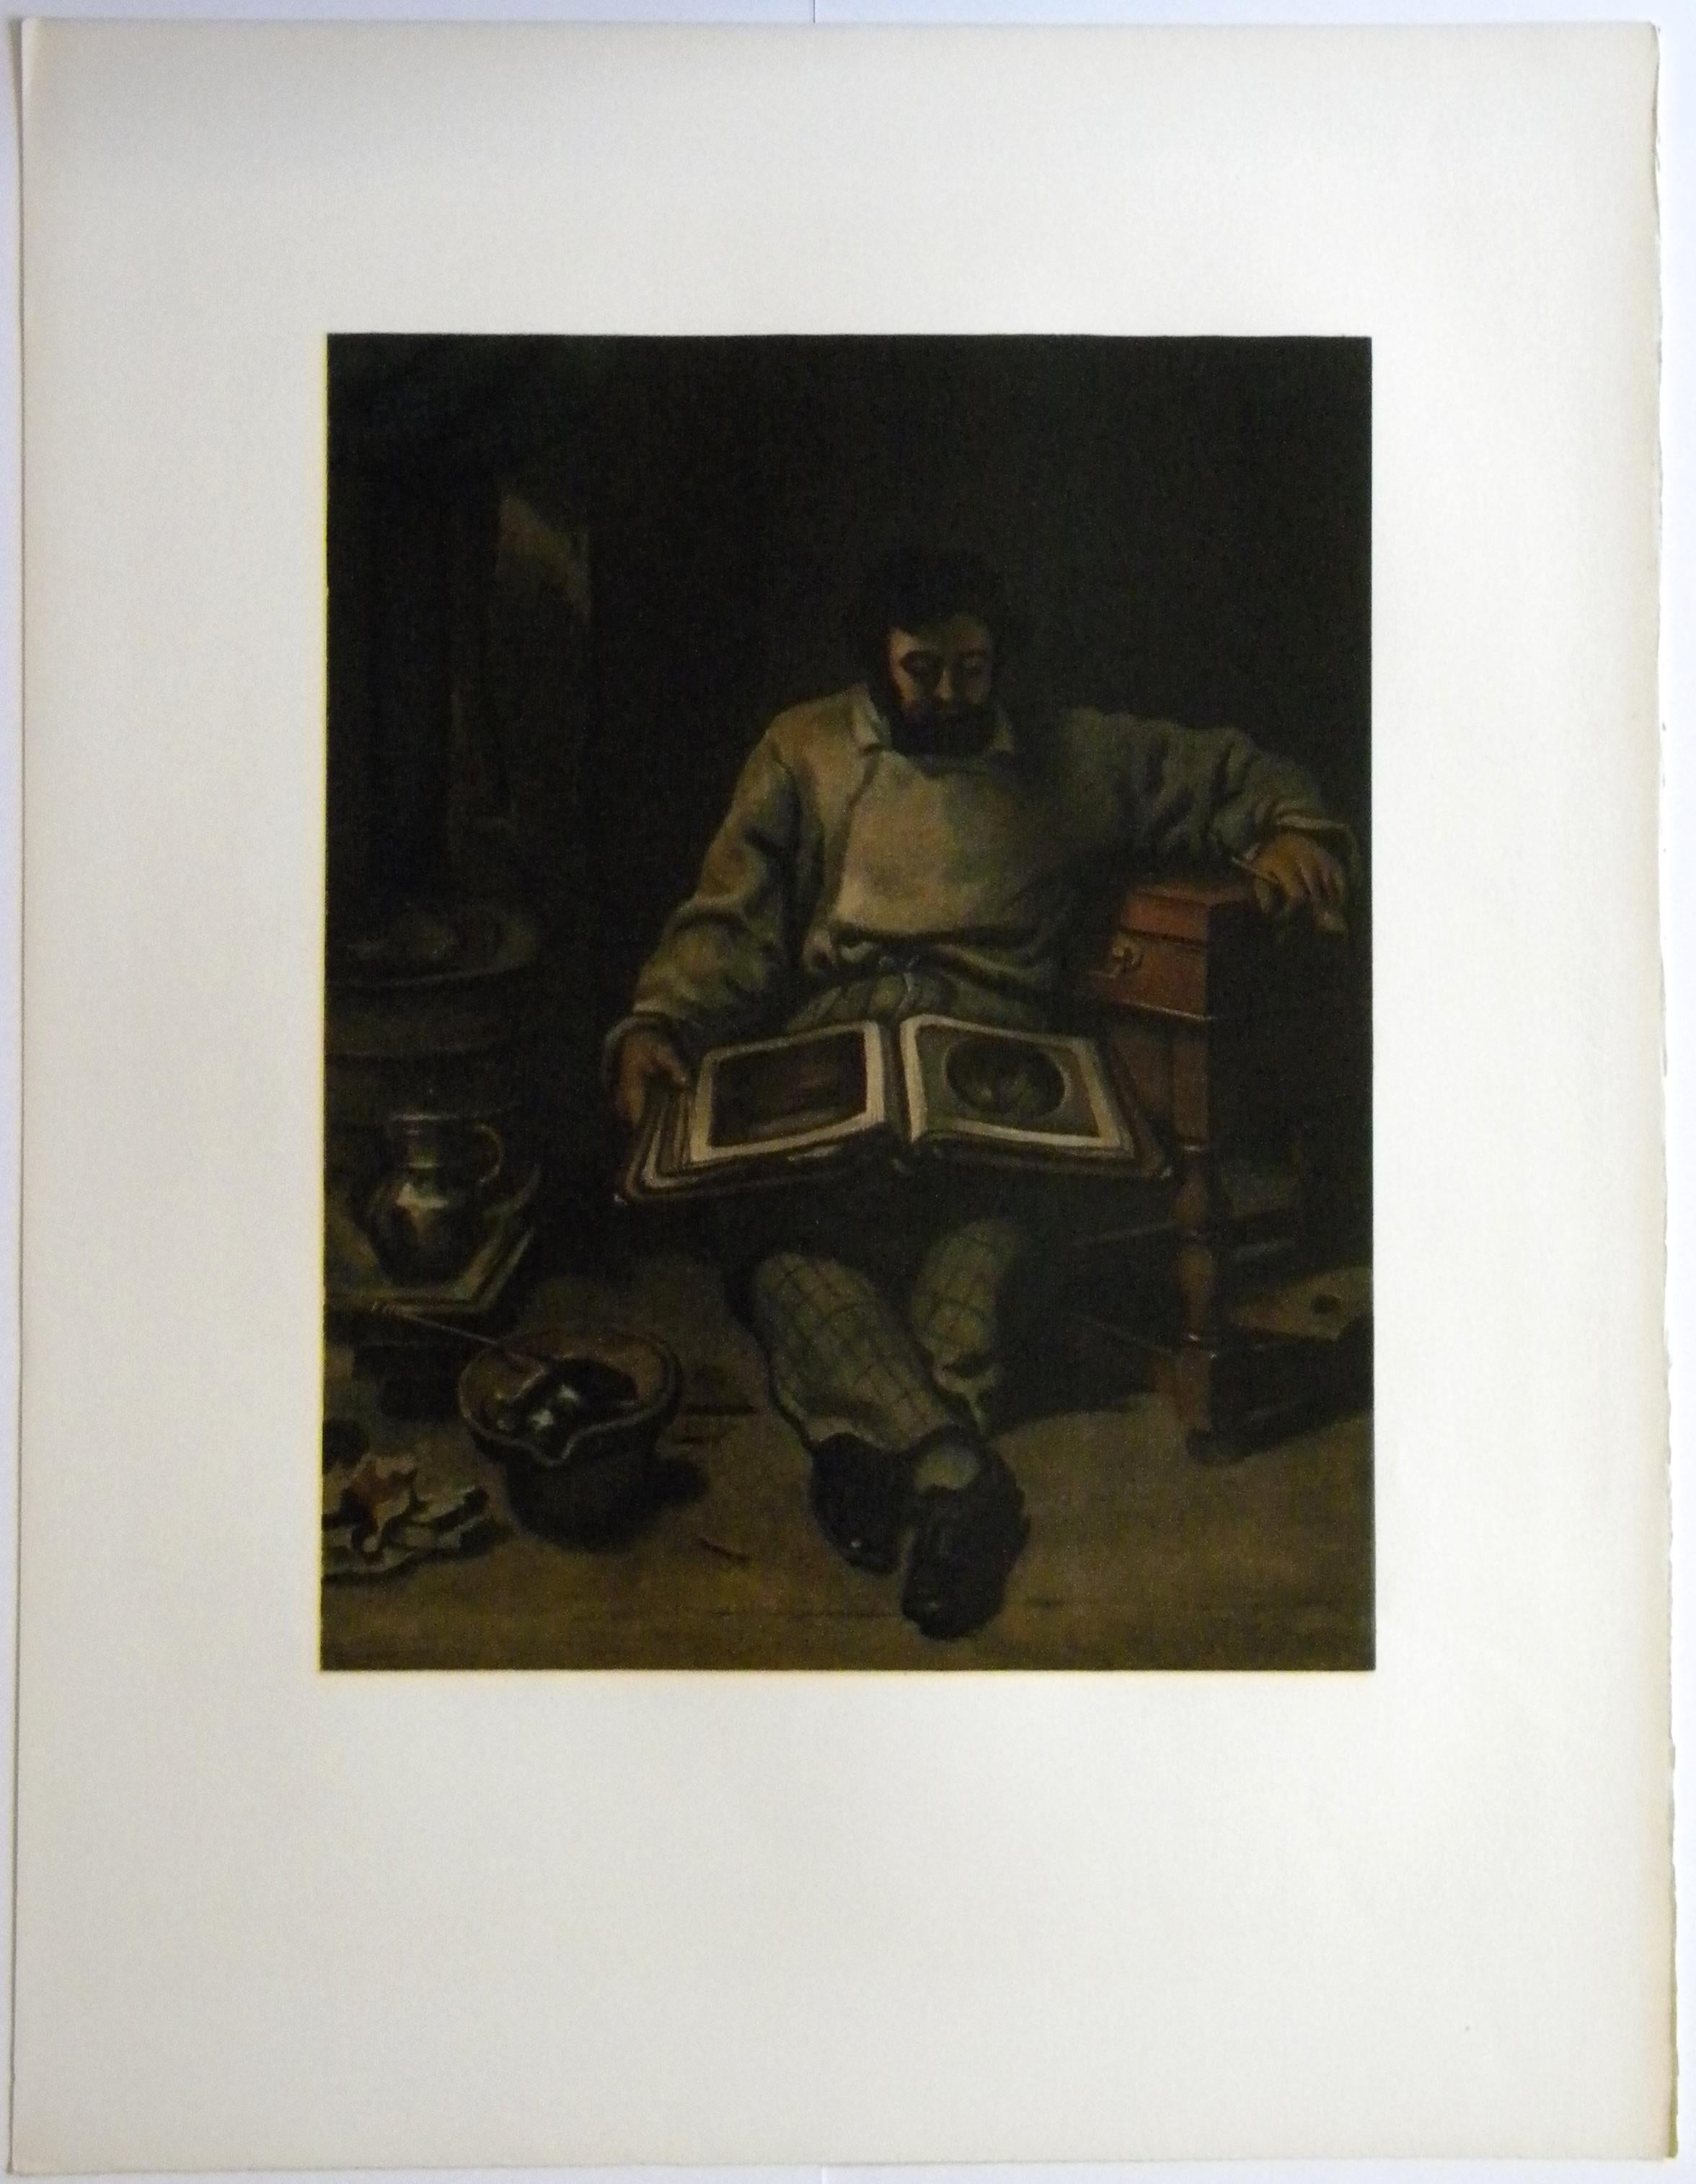 Medium: lithograph (after the Gustave Courbet painting). Printed in Paris on Arches paper at the Mourlot studio in 1973 in an edition of 1000 for the Collection Pierre Lévy deluxe portfolio. The image measures 16 x 12 1/2 inches (405 x 317 mm) and